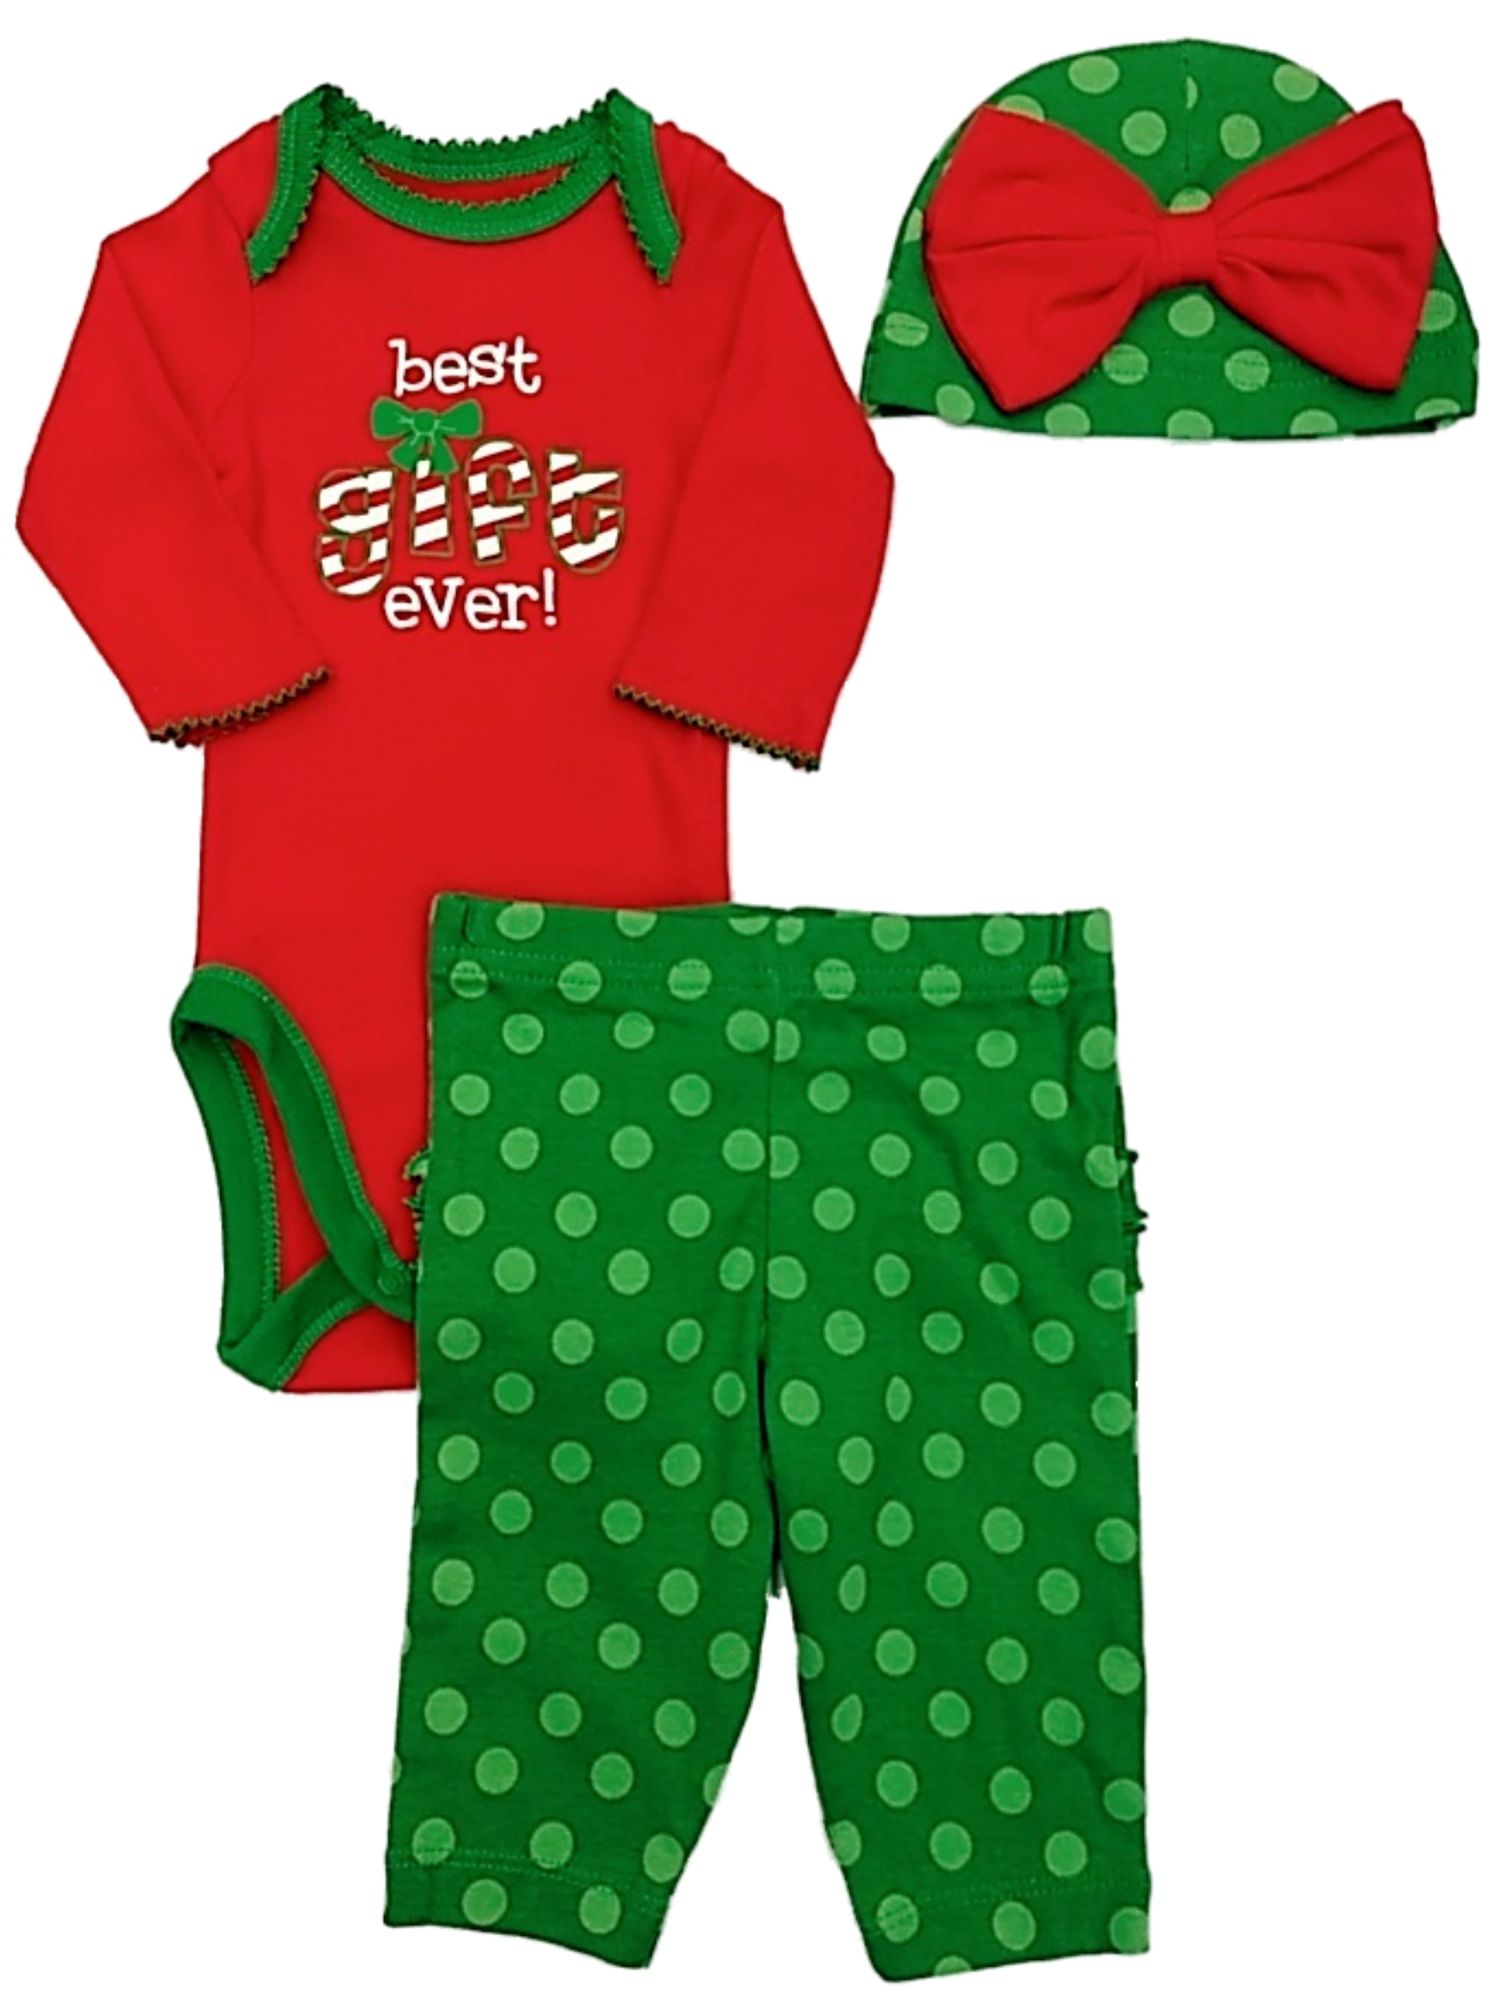 Gerber Infant Girls Red Best Gift Ever Christmas 3 Piece Outfit Set